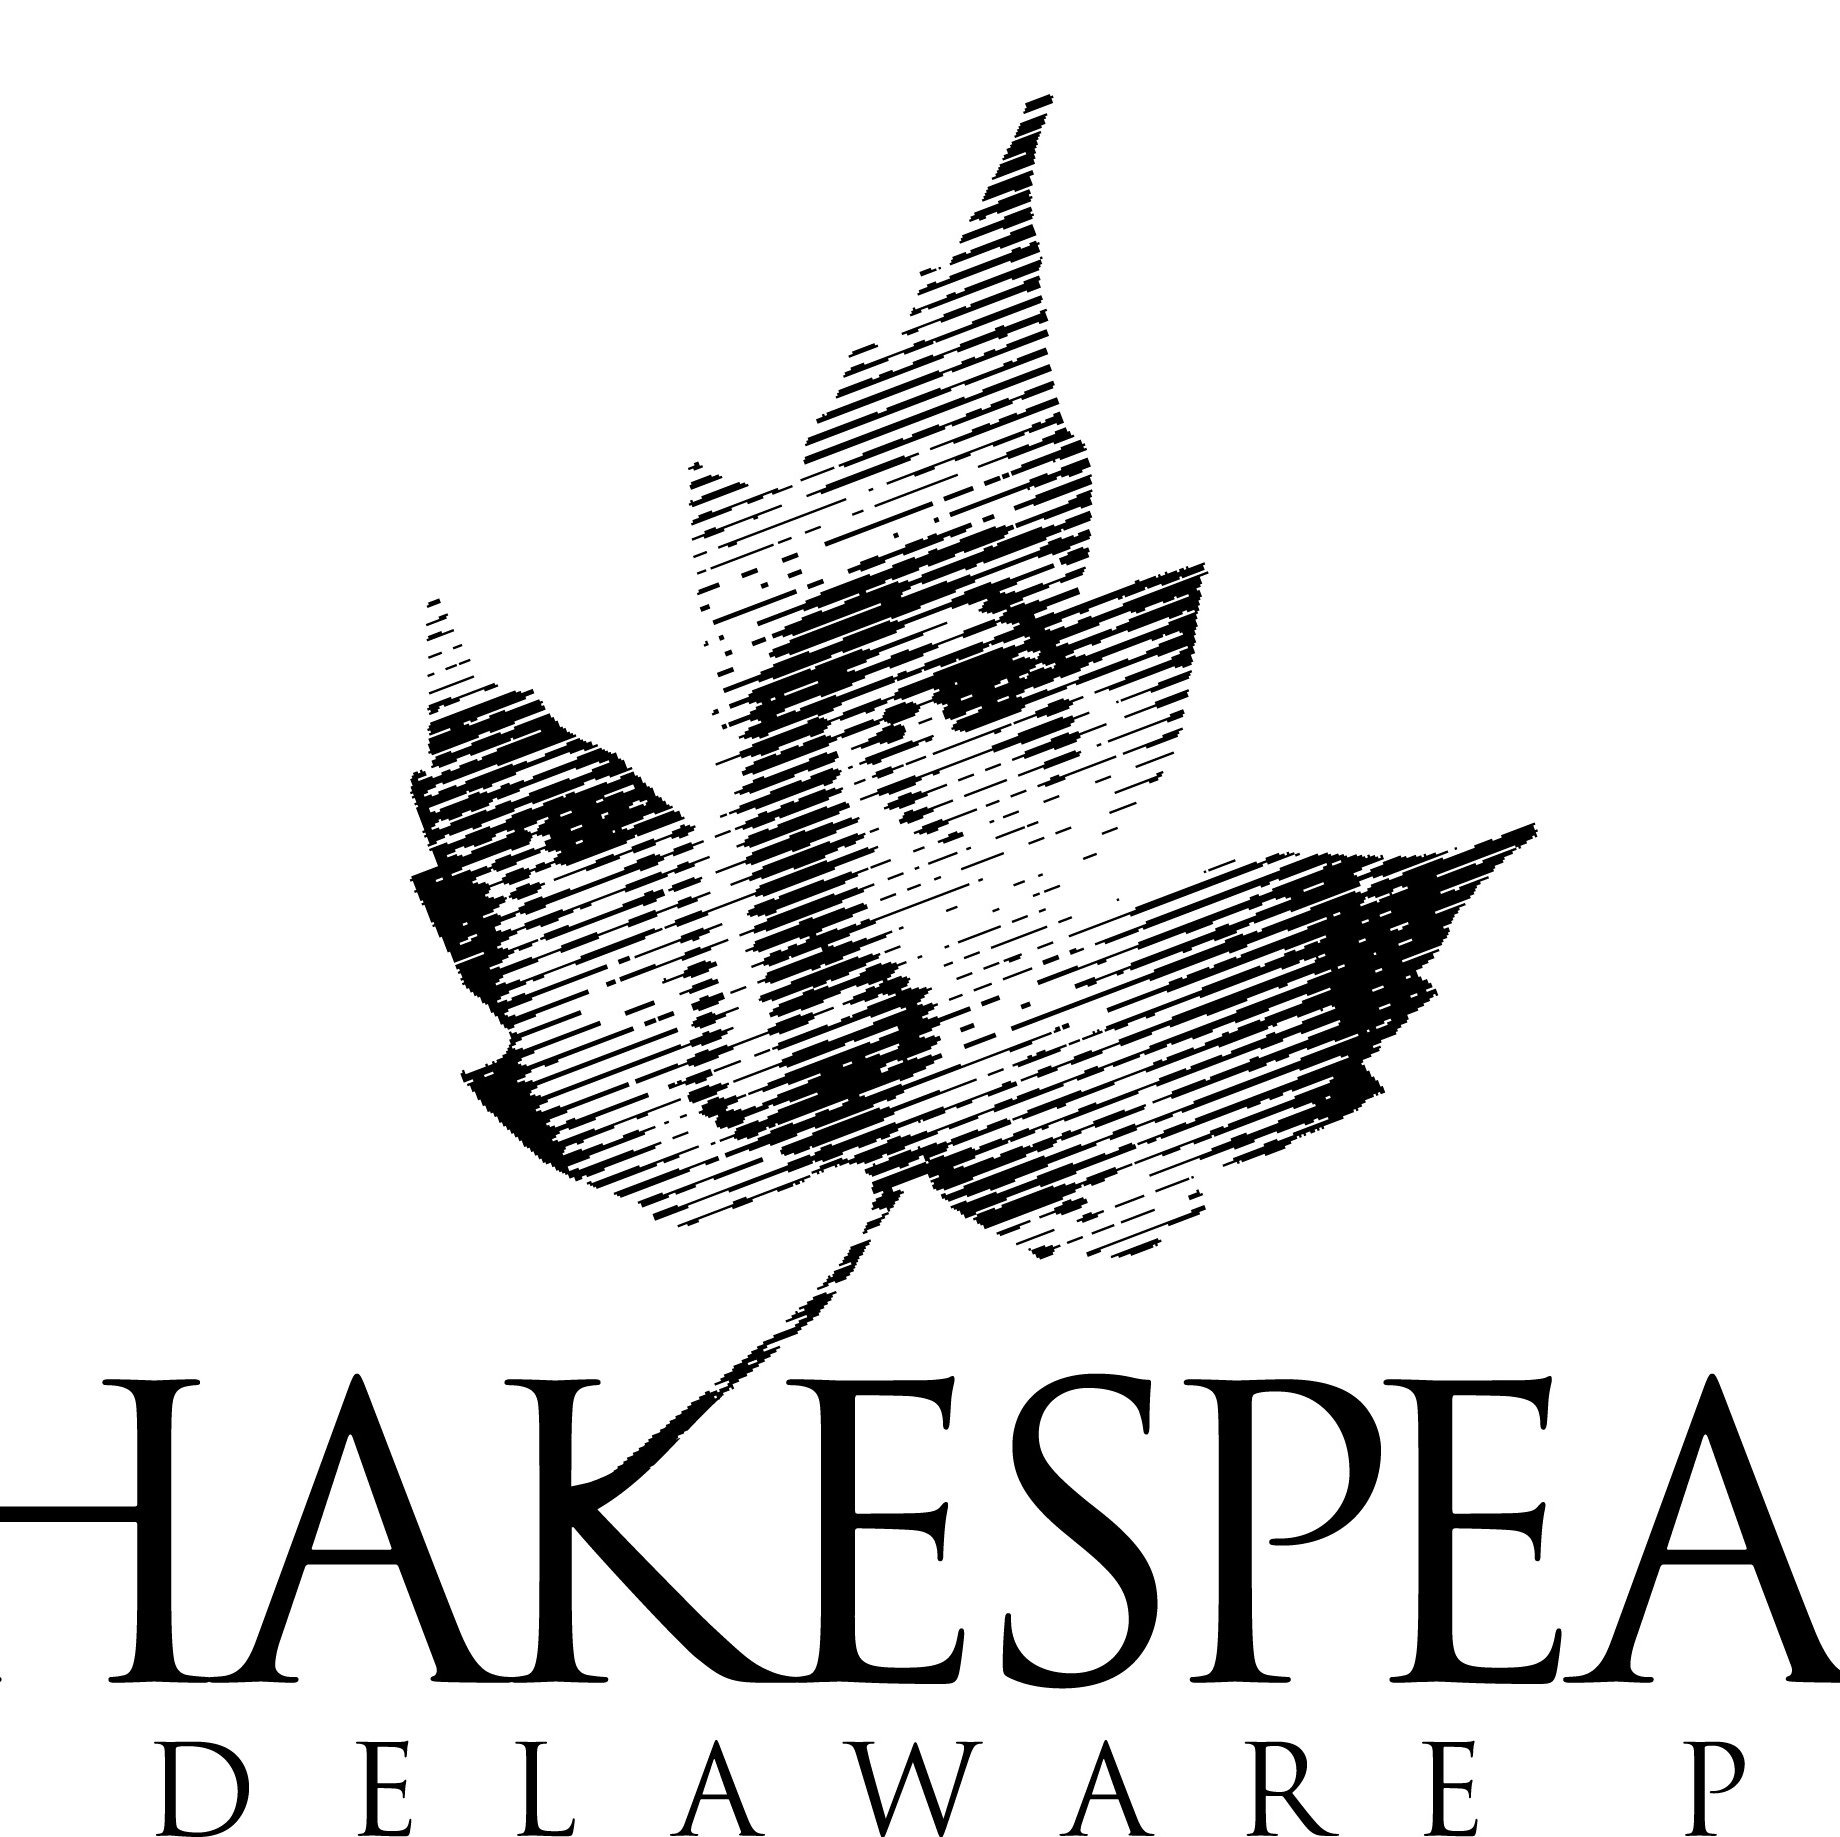 Educating, Inspiring, and Entertaining Audiences through Free Shakespeare across Western New York since 1976.